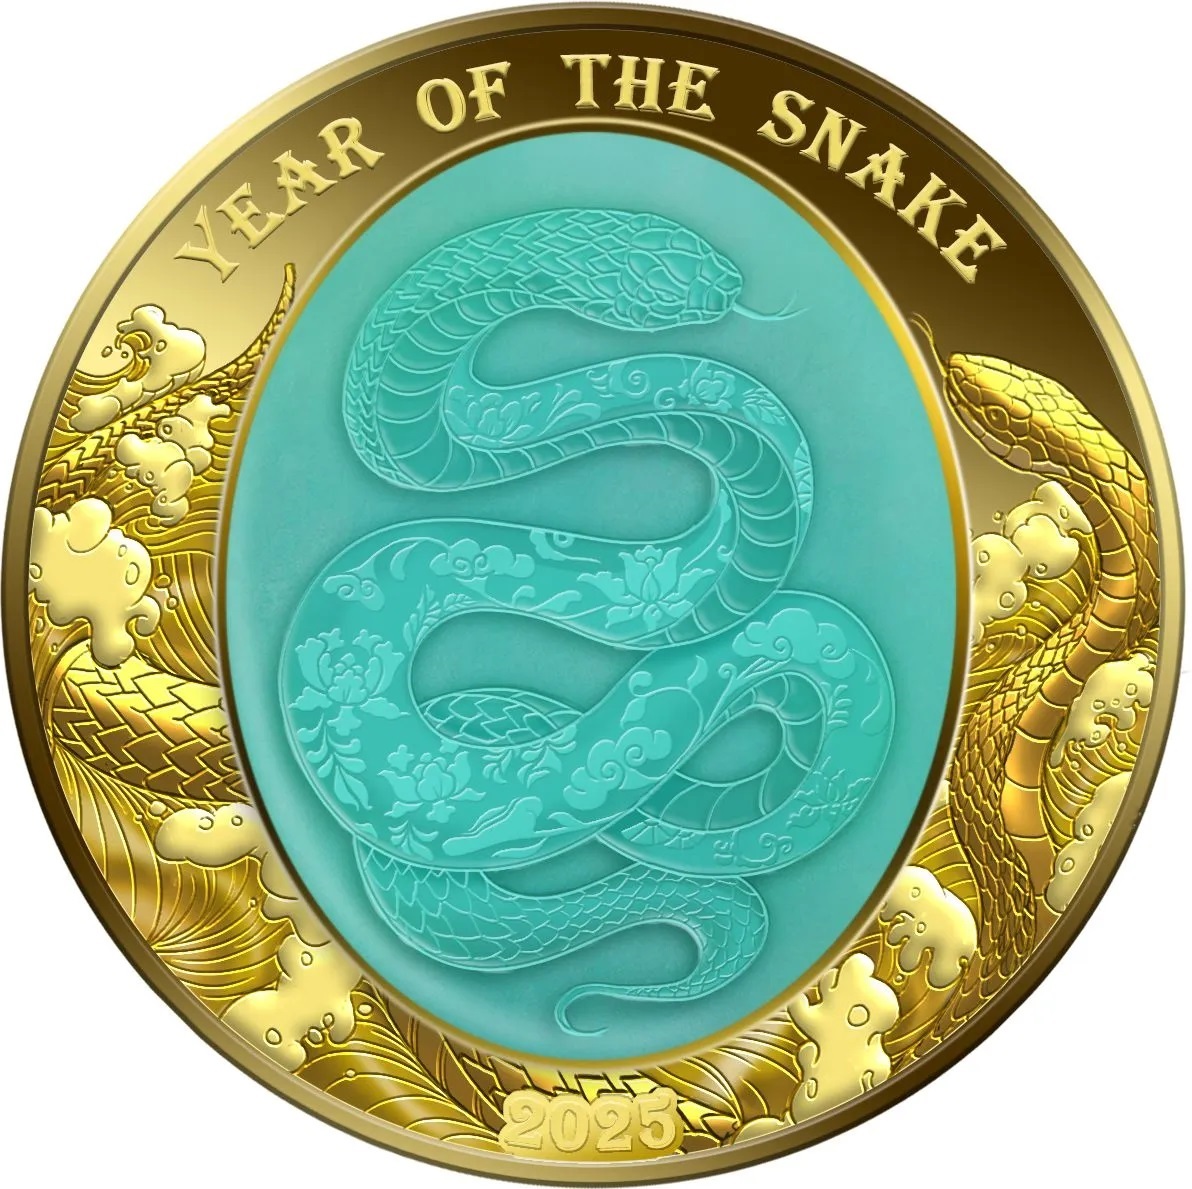 (W106.100.D.2025.5.oz.Au.1576820112) 100 Dollars Solomon Islands 2025 5 oz Proof gold - Year of the Snake Reverse (zoom)